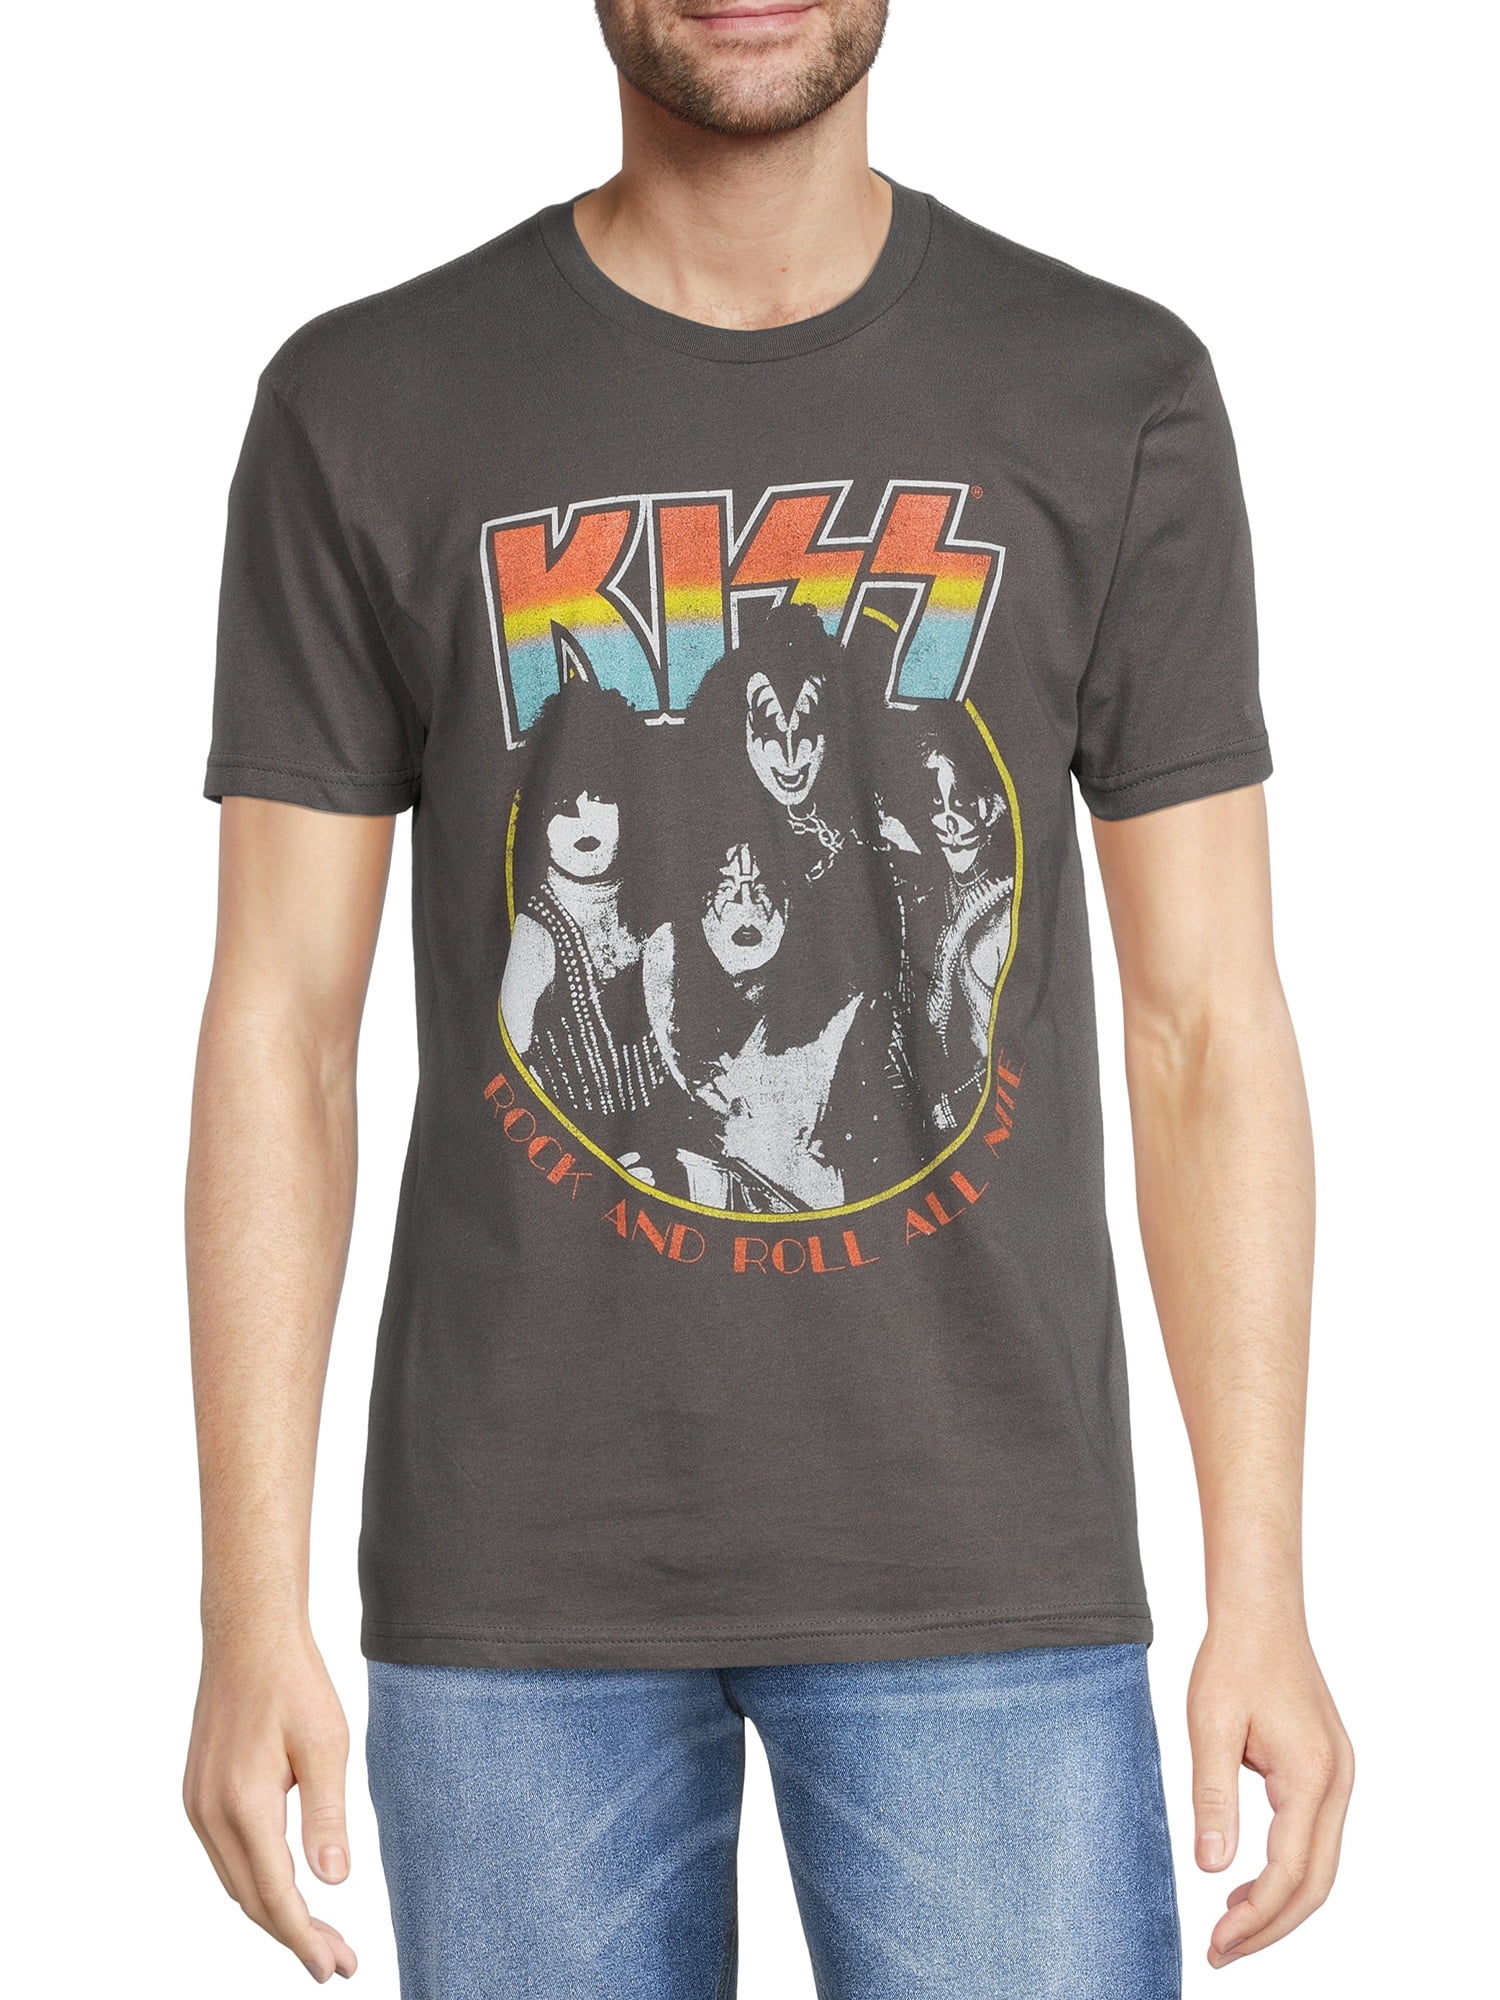 Kiss Men's Group Band T-Shirt with Short Sleeves, Sizes S-3XL